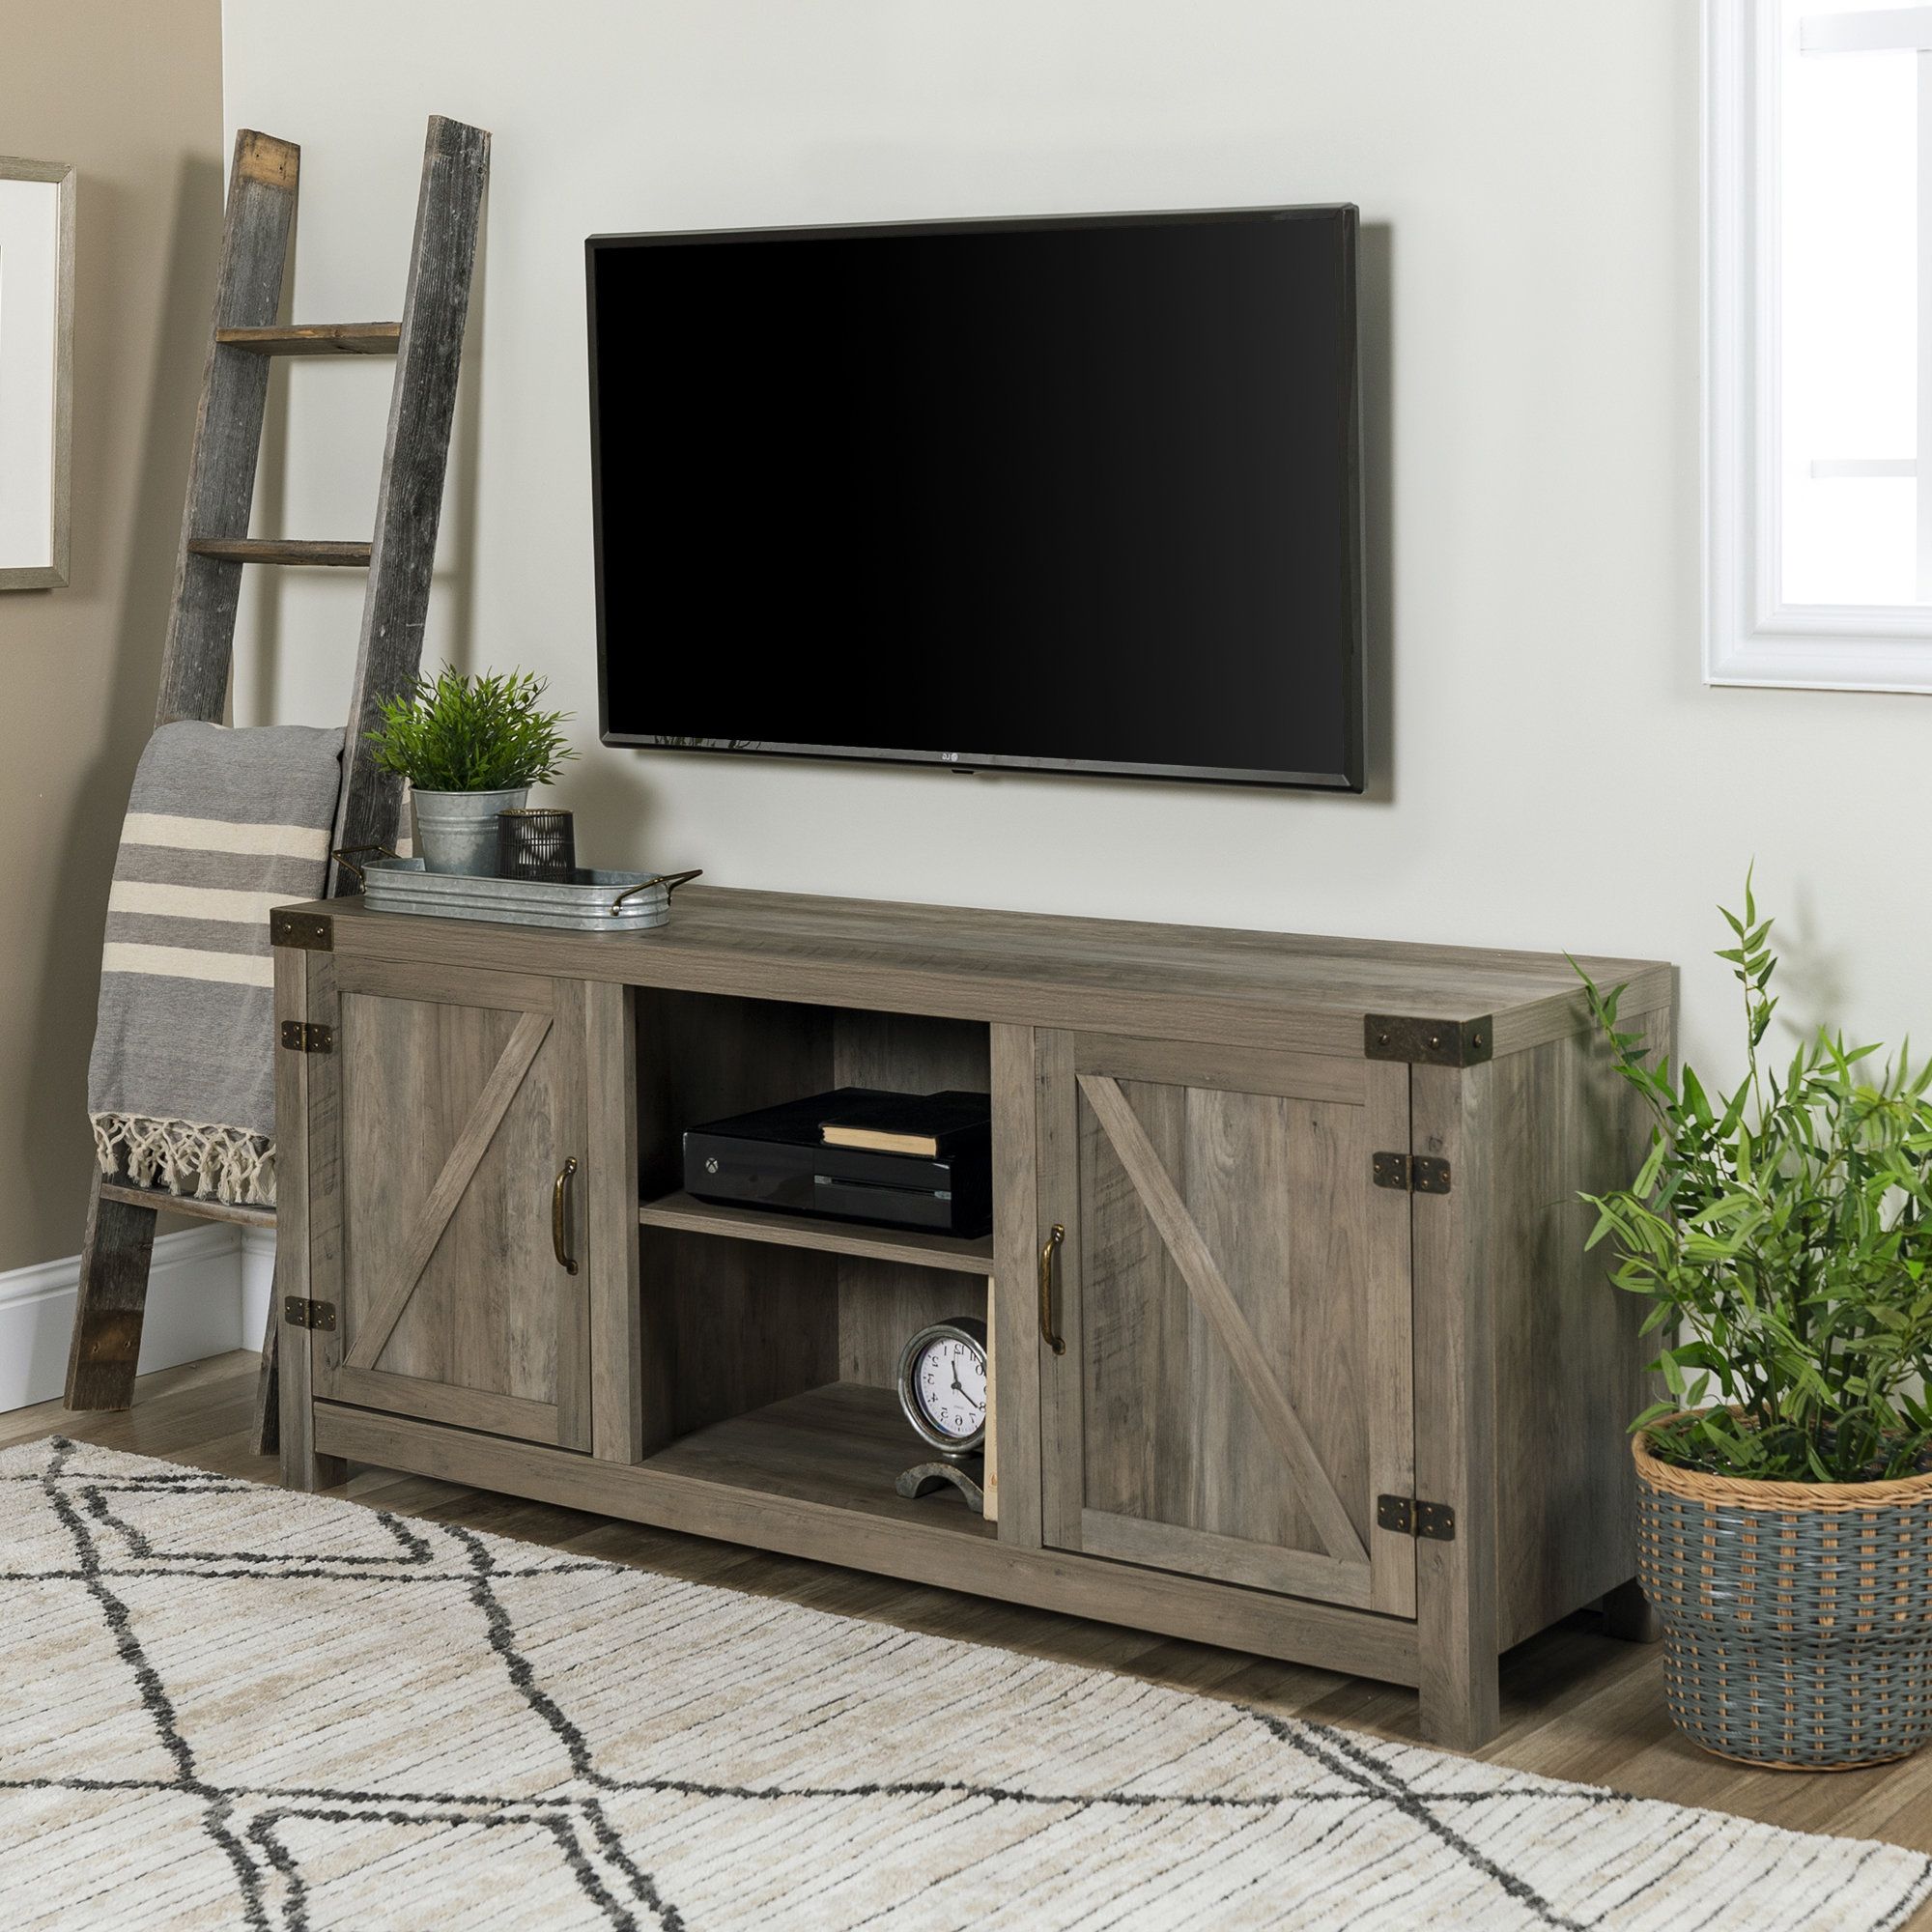 Wayfair Inside Preferred Corner Tv Cabinets For Flat Screens With Doors (View 11 of 20)